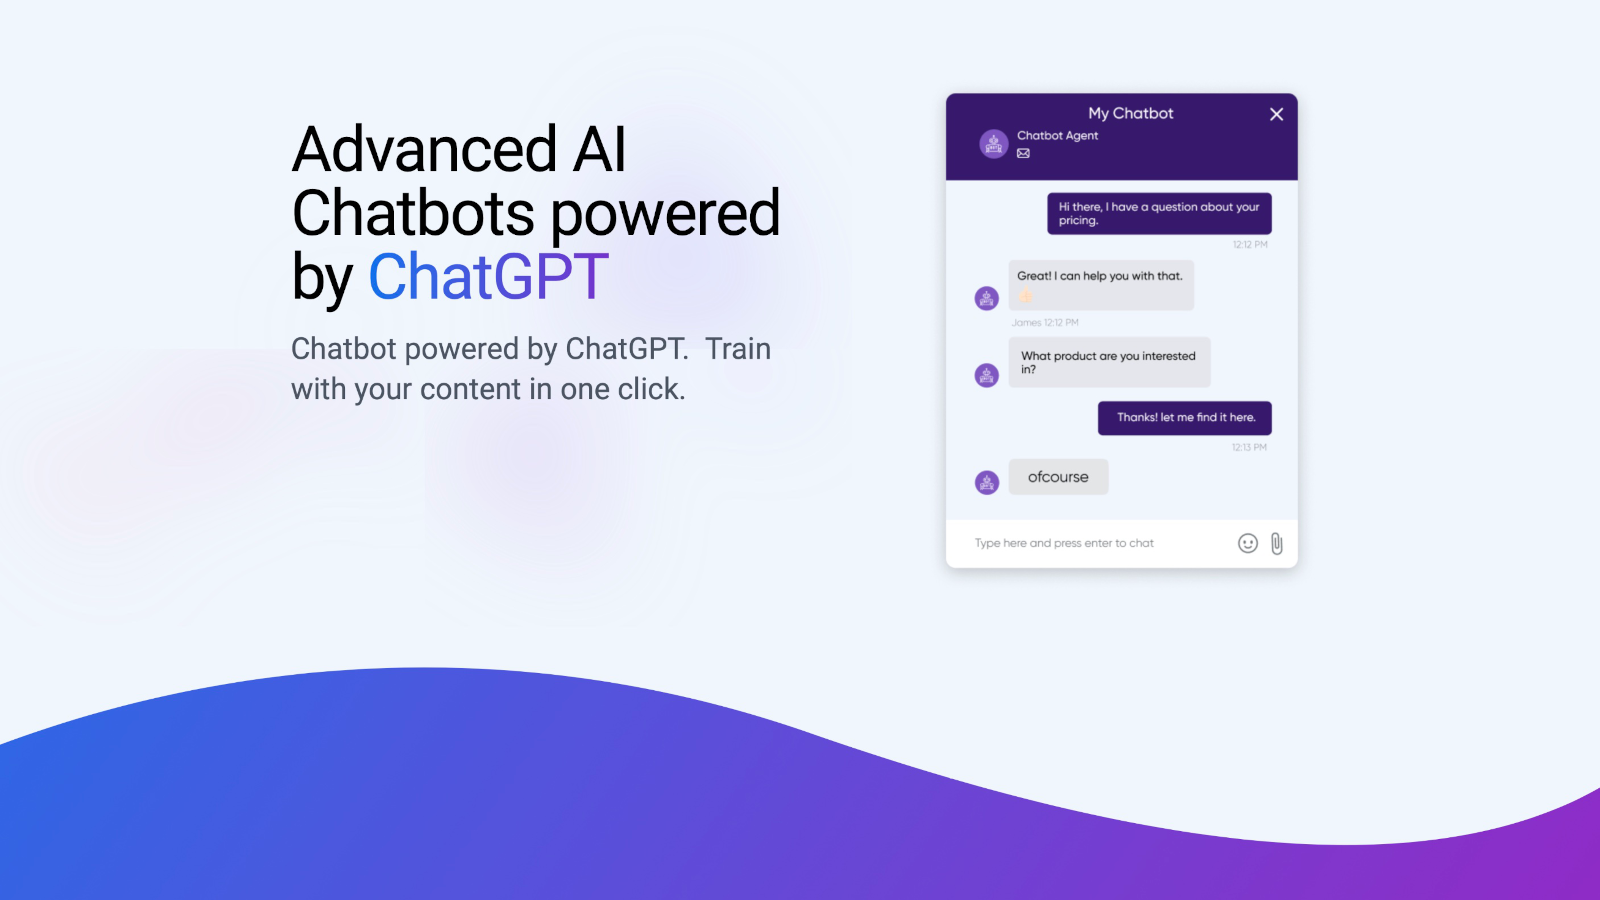 Build Chatbots powered by ChatGPT and trained on your data